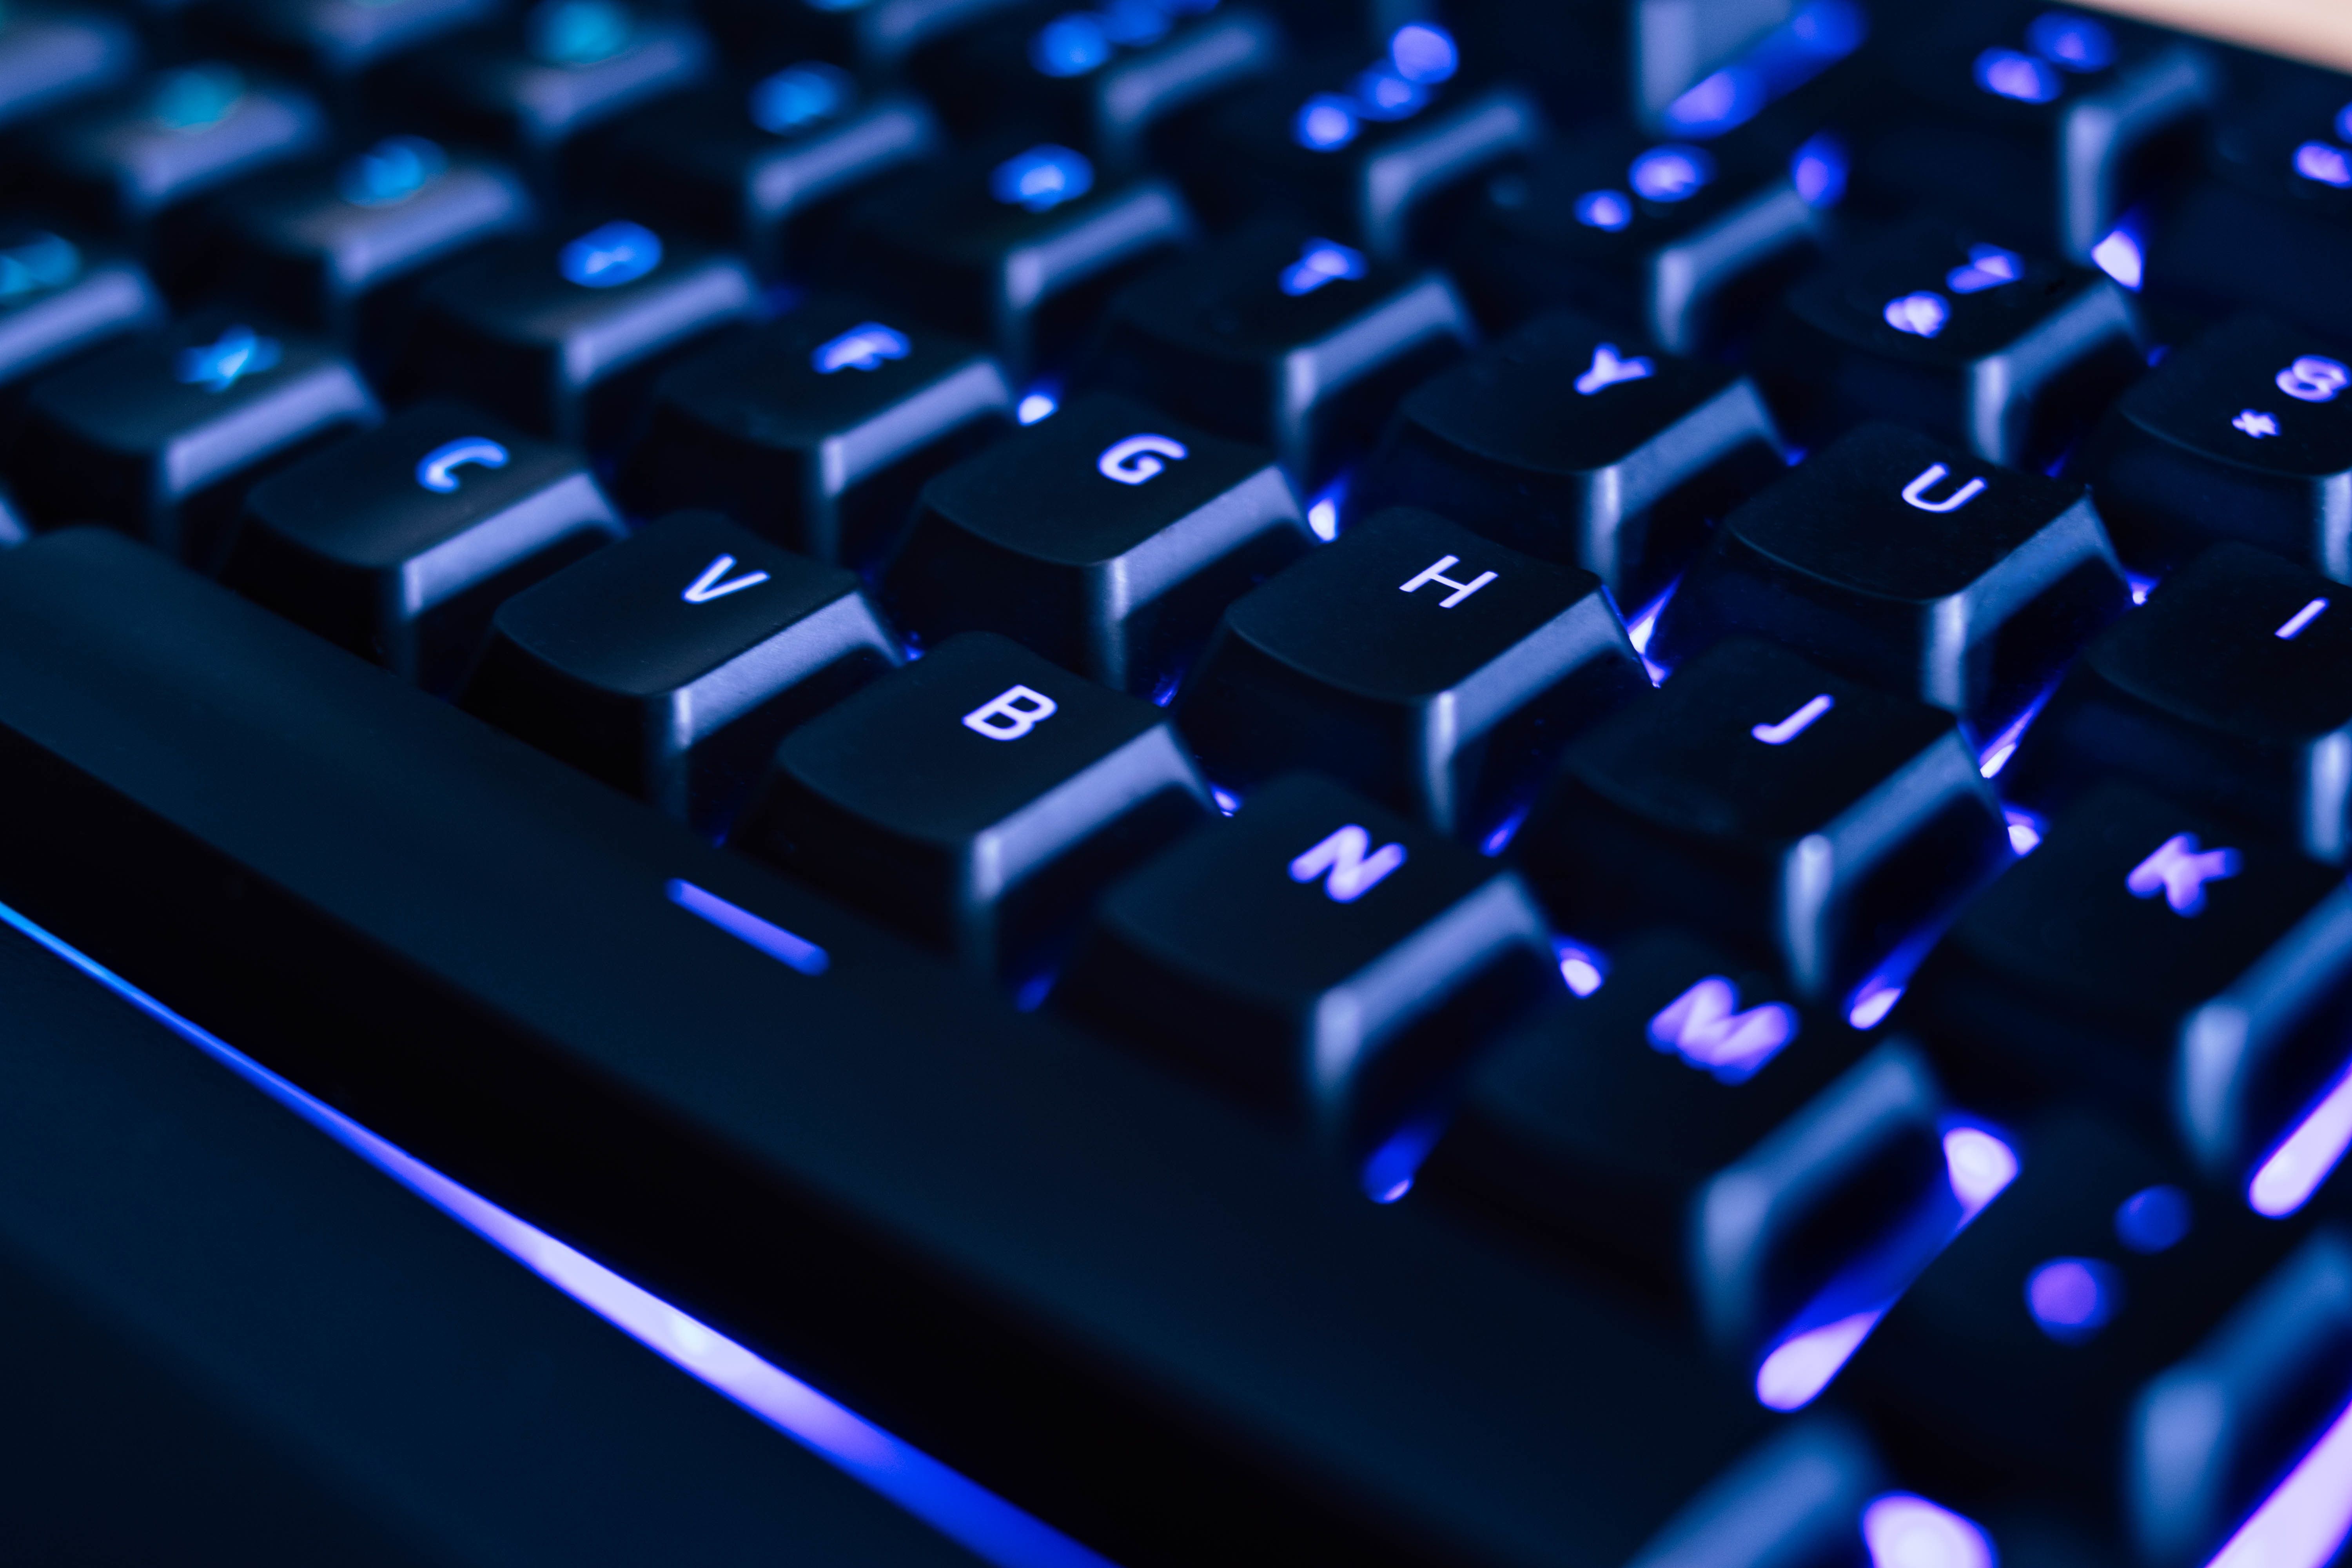 100+] Computer Keyboard Pictures | Wallpapers.com